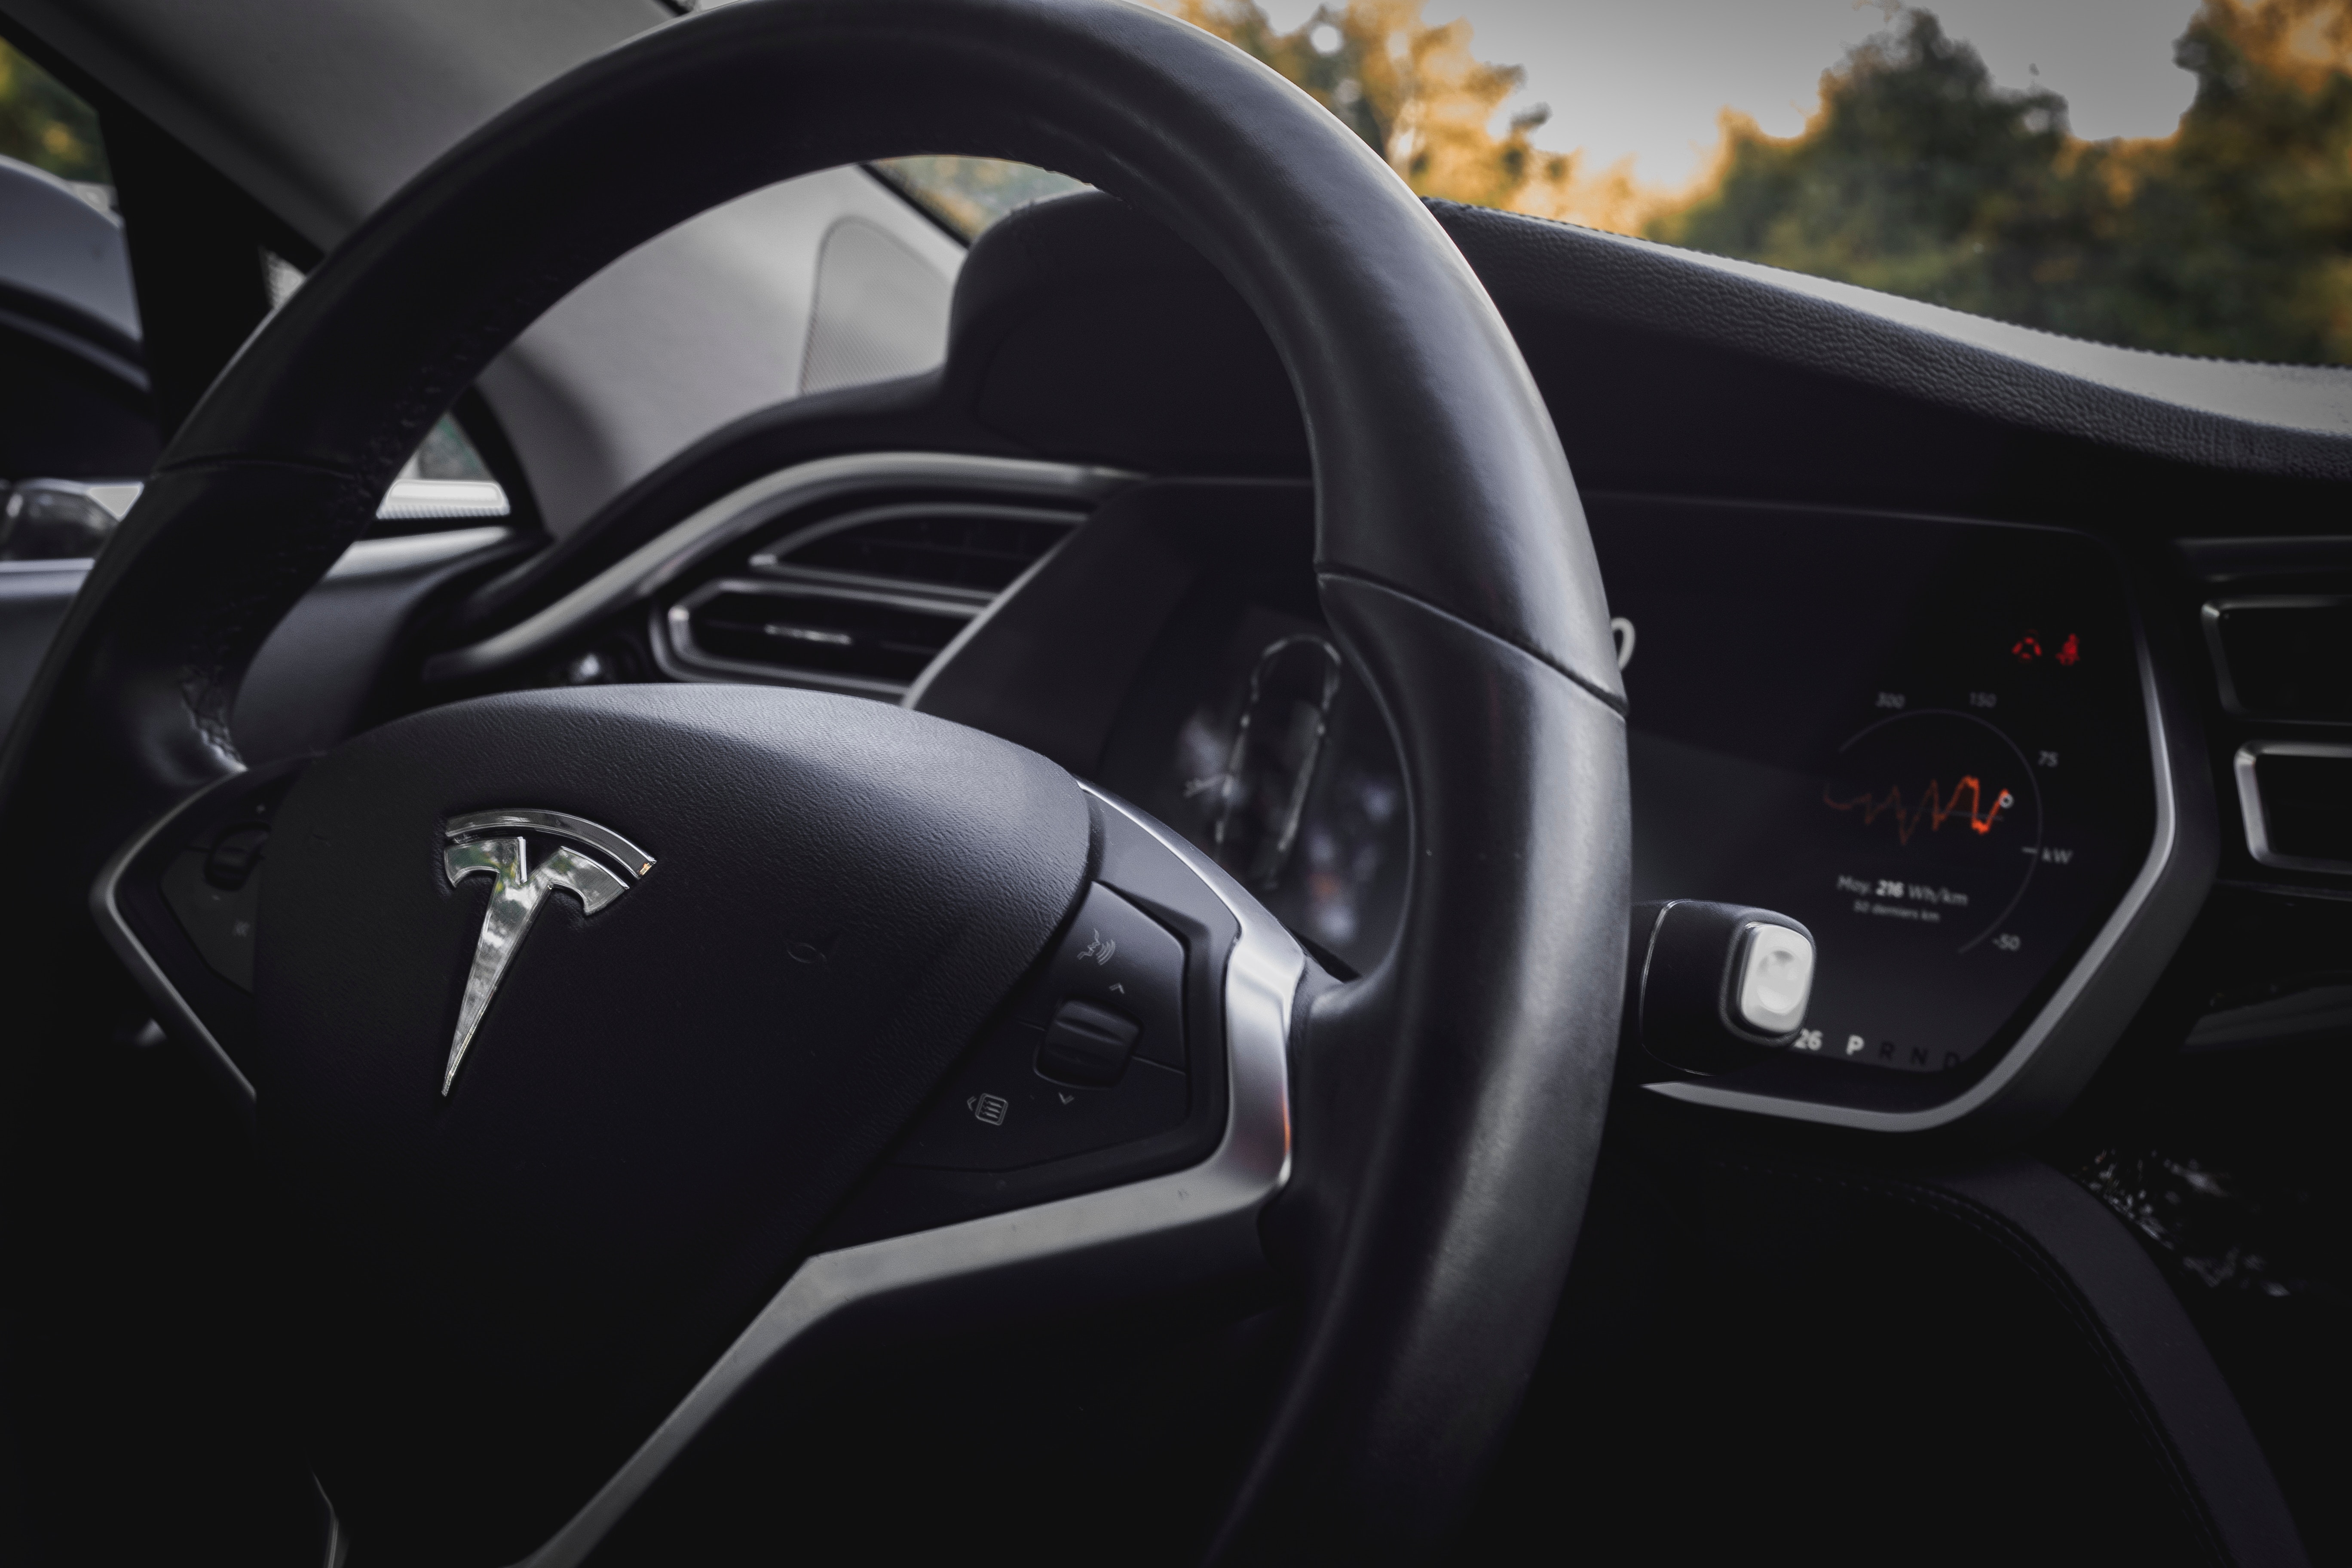 What the recent announcement by Tesla’s CEO, Elon Musk, means for the fleet industry